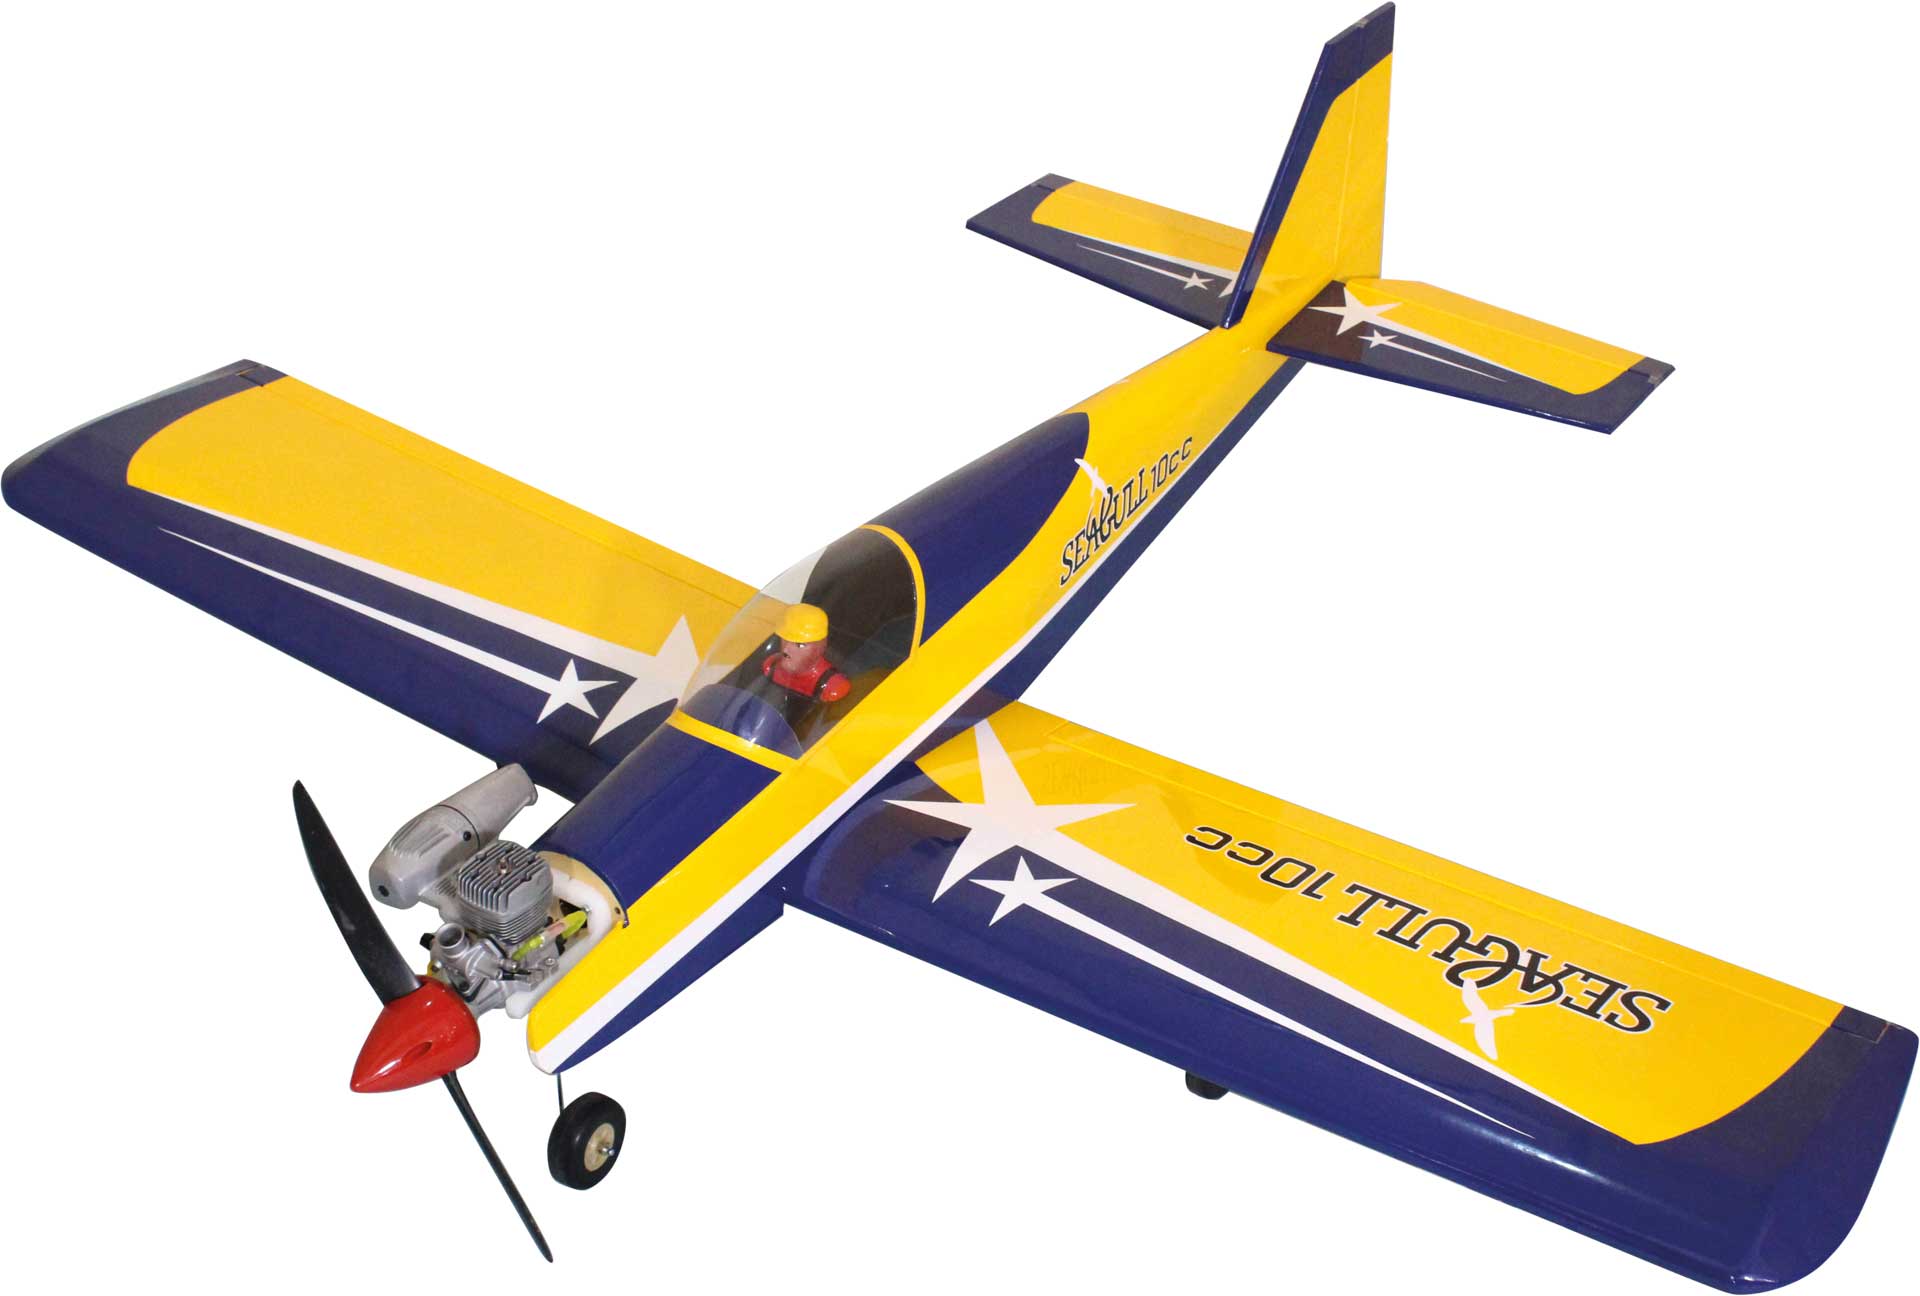 Seagull Models ( SG-Models ) Trainer 40 "Low Wing" ARF Tiefdecker